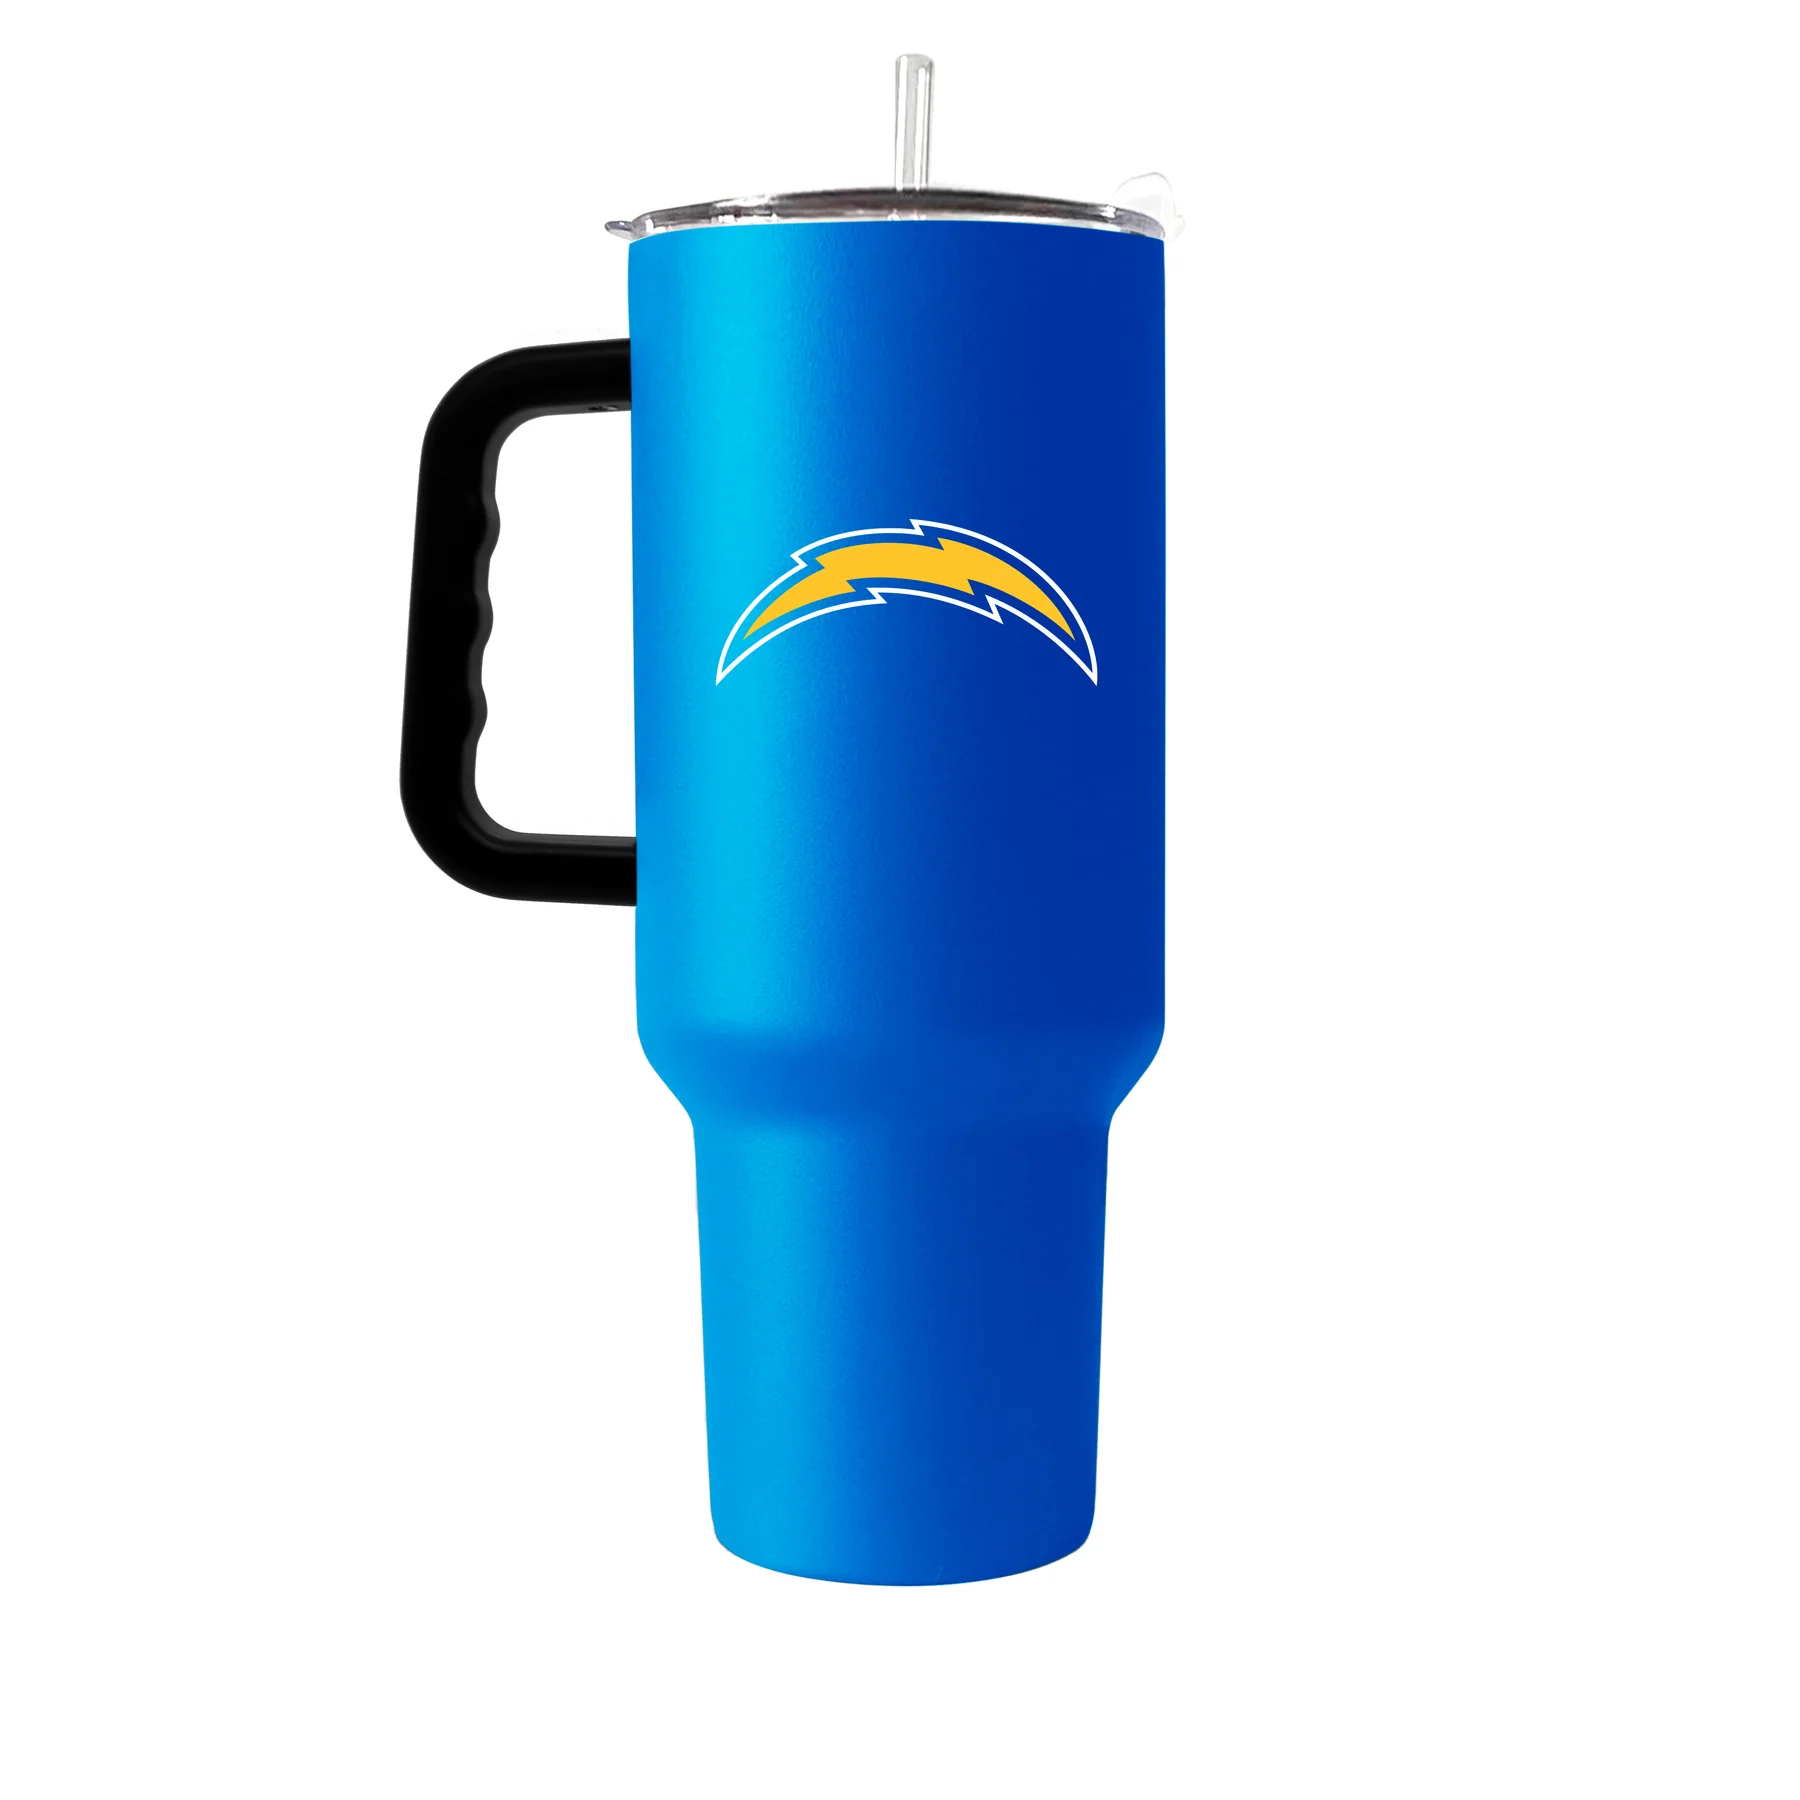 Charger 40 Oz Tumbler with Handle